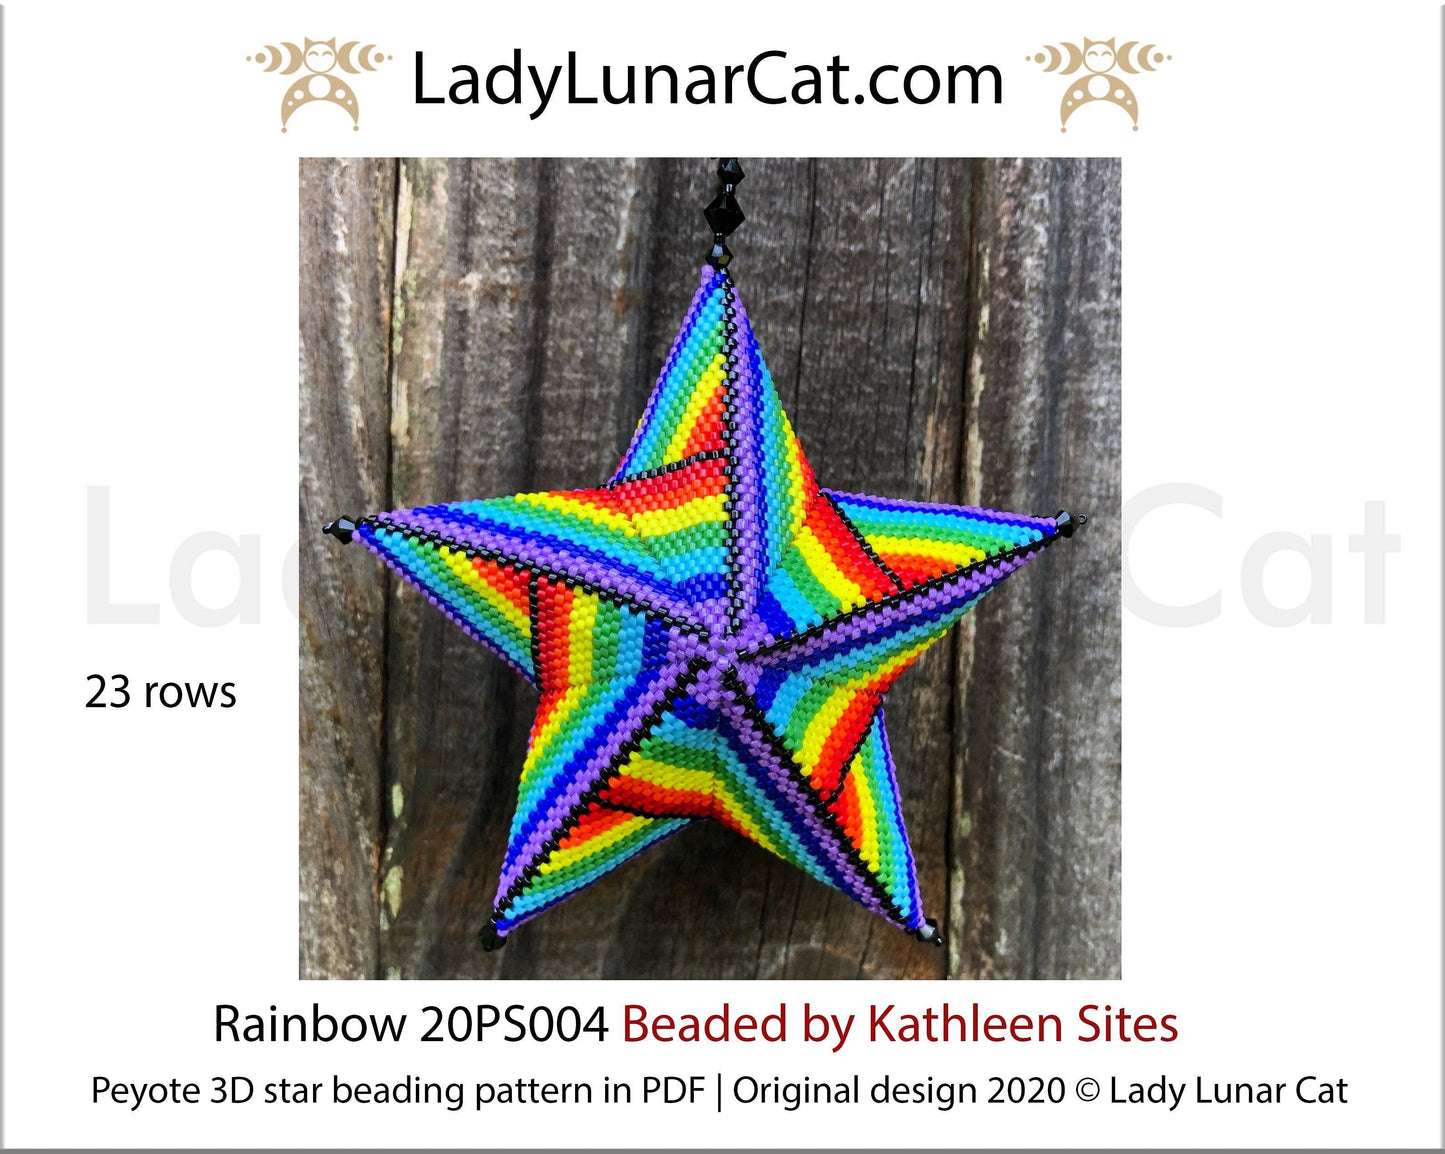 Peyote star patterns for beading colorful Rainbow 20PS004 LadyLunarCat